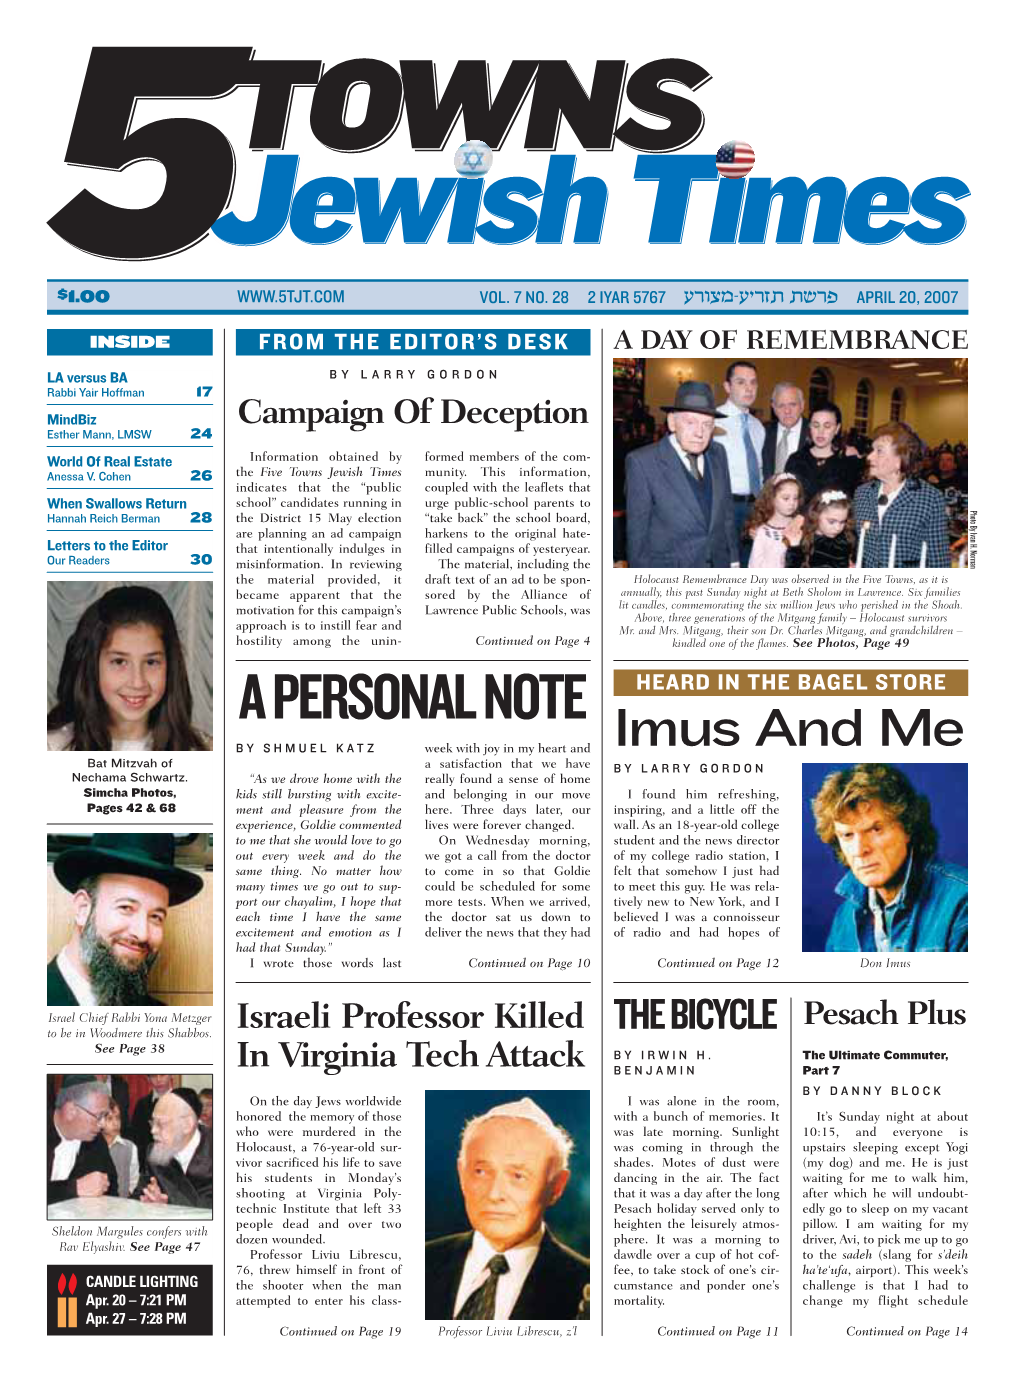 The 5 Towns Jewish Times